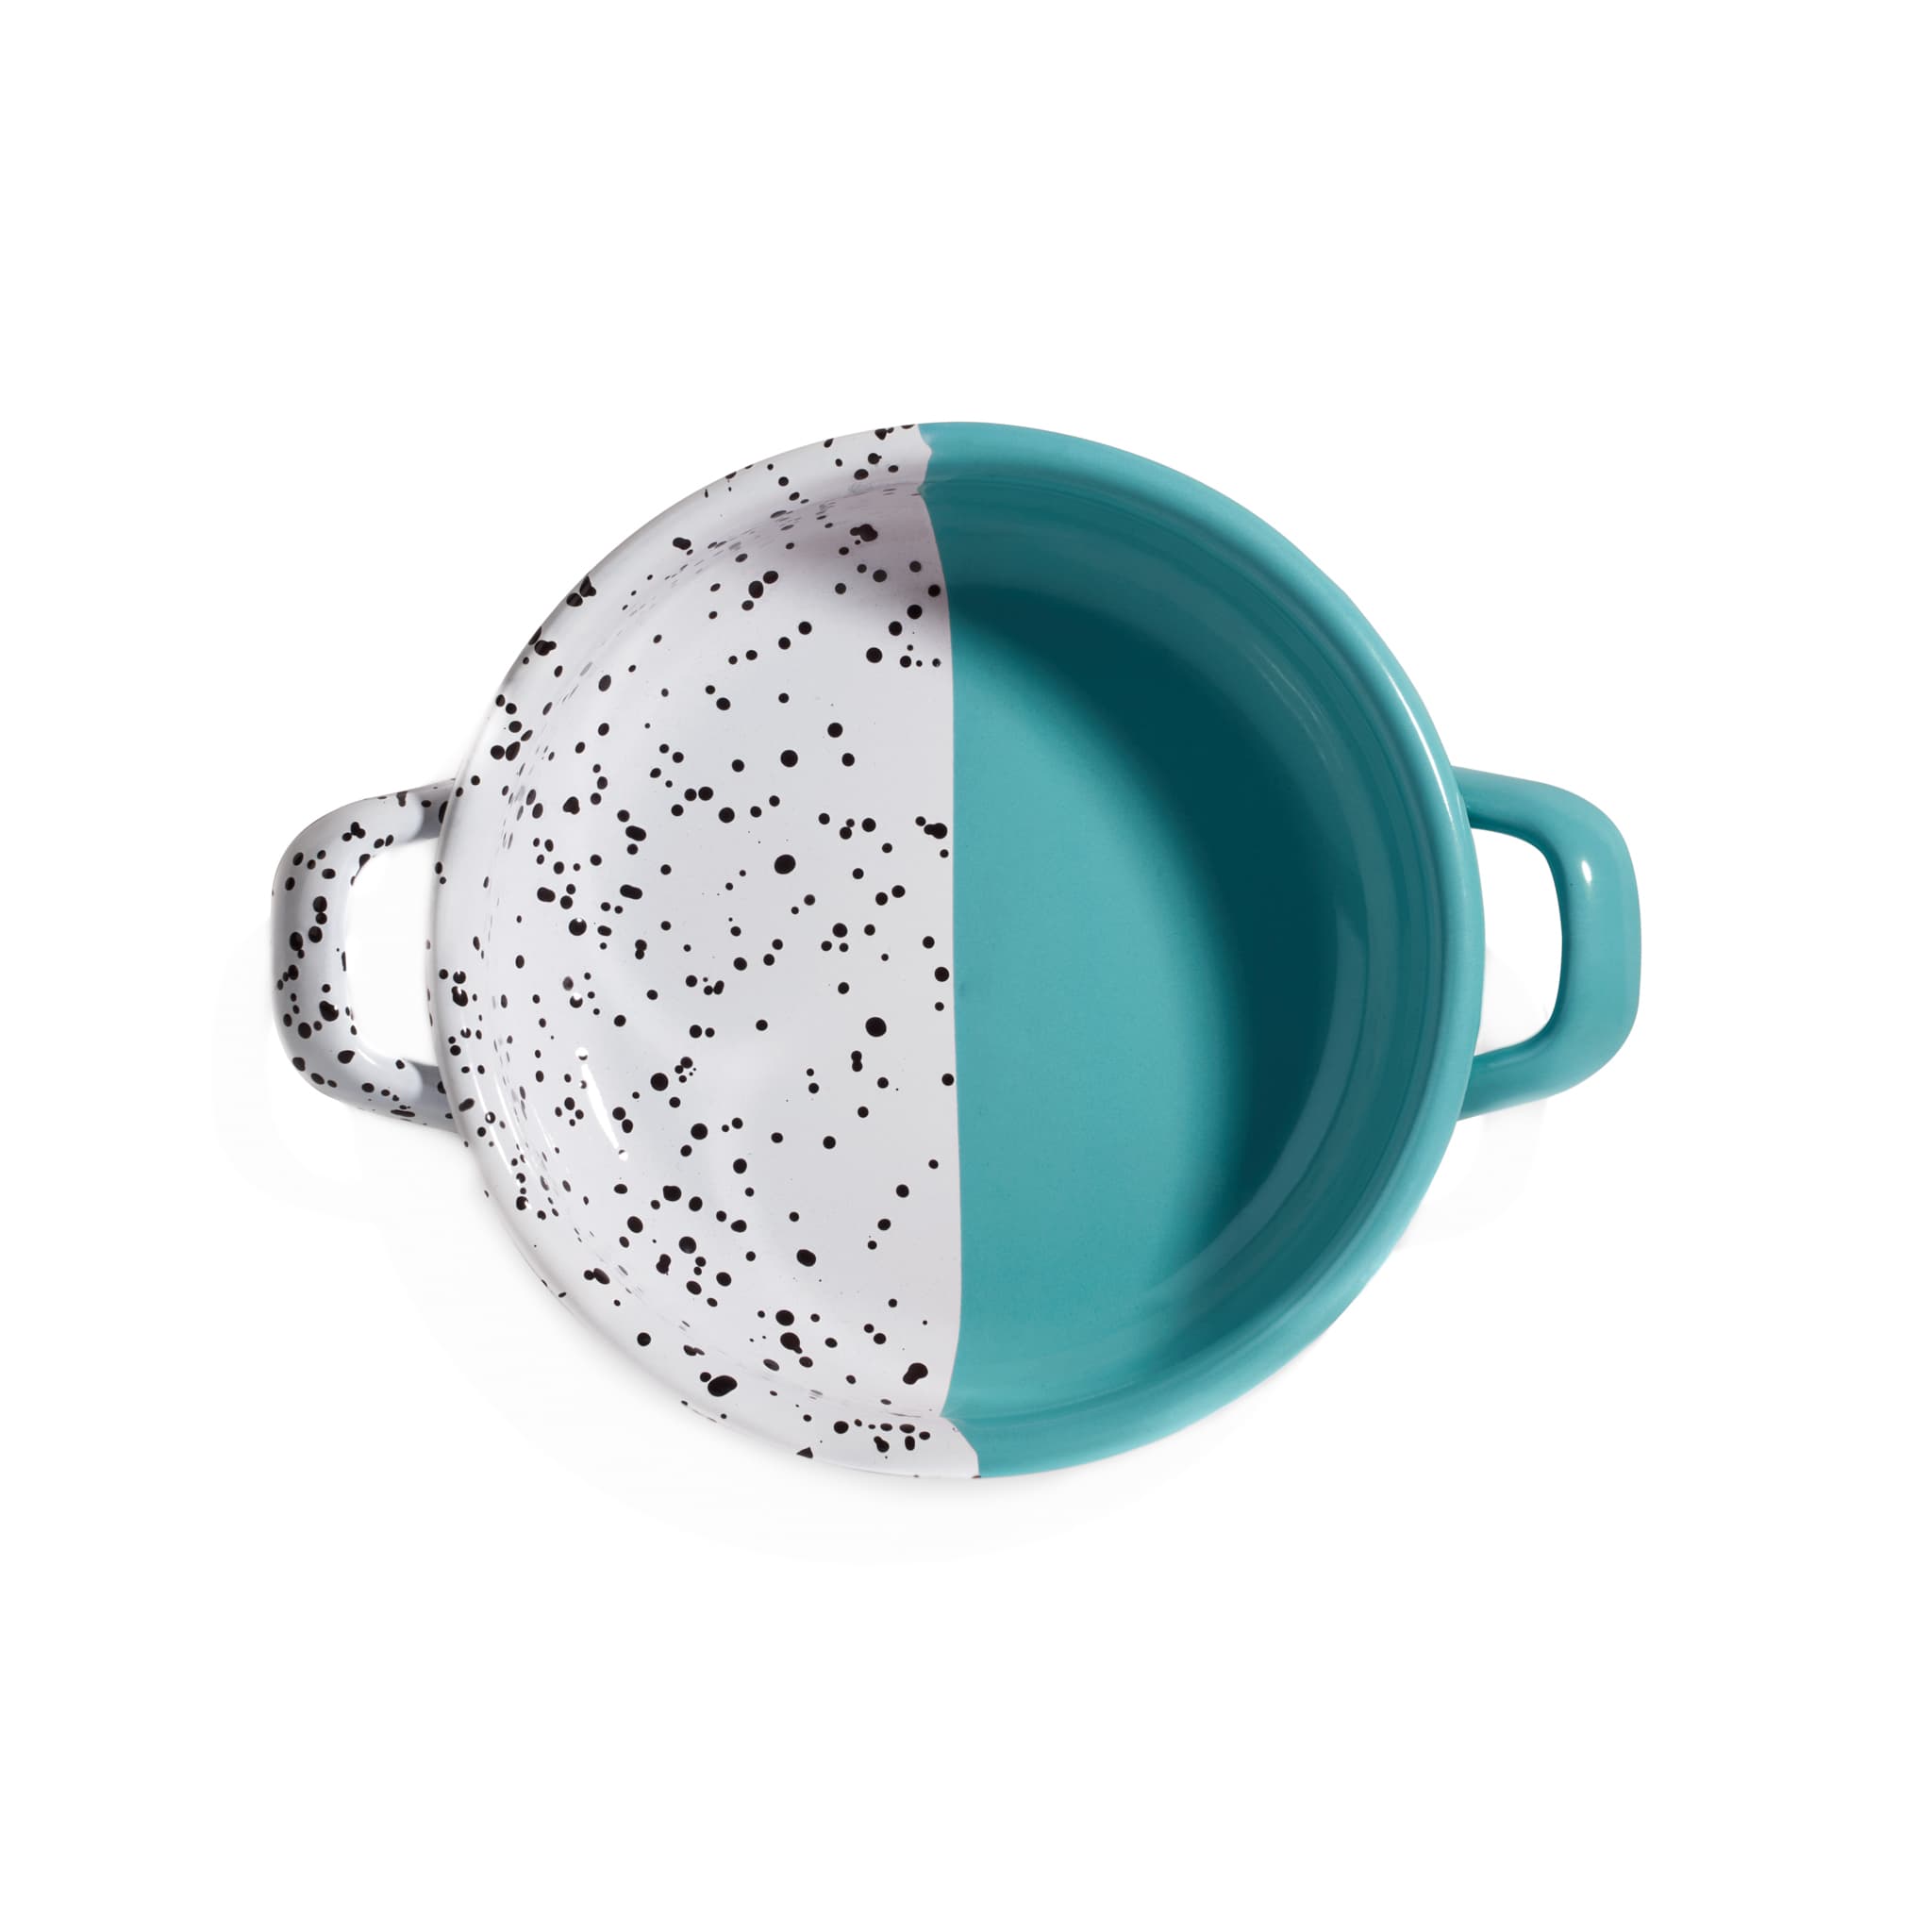 Kapka Colour Pop Enamel Frying Pan and Serving Dish Turquoise 16cm Turkish Oven to Tableware